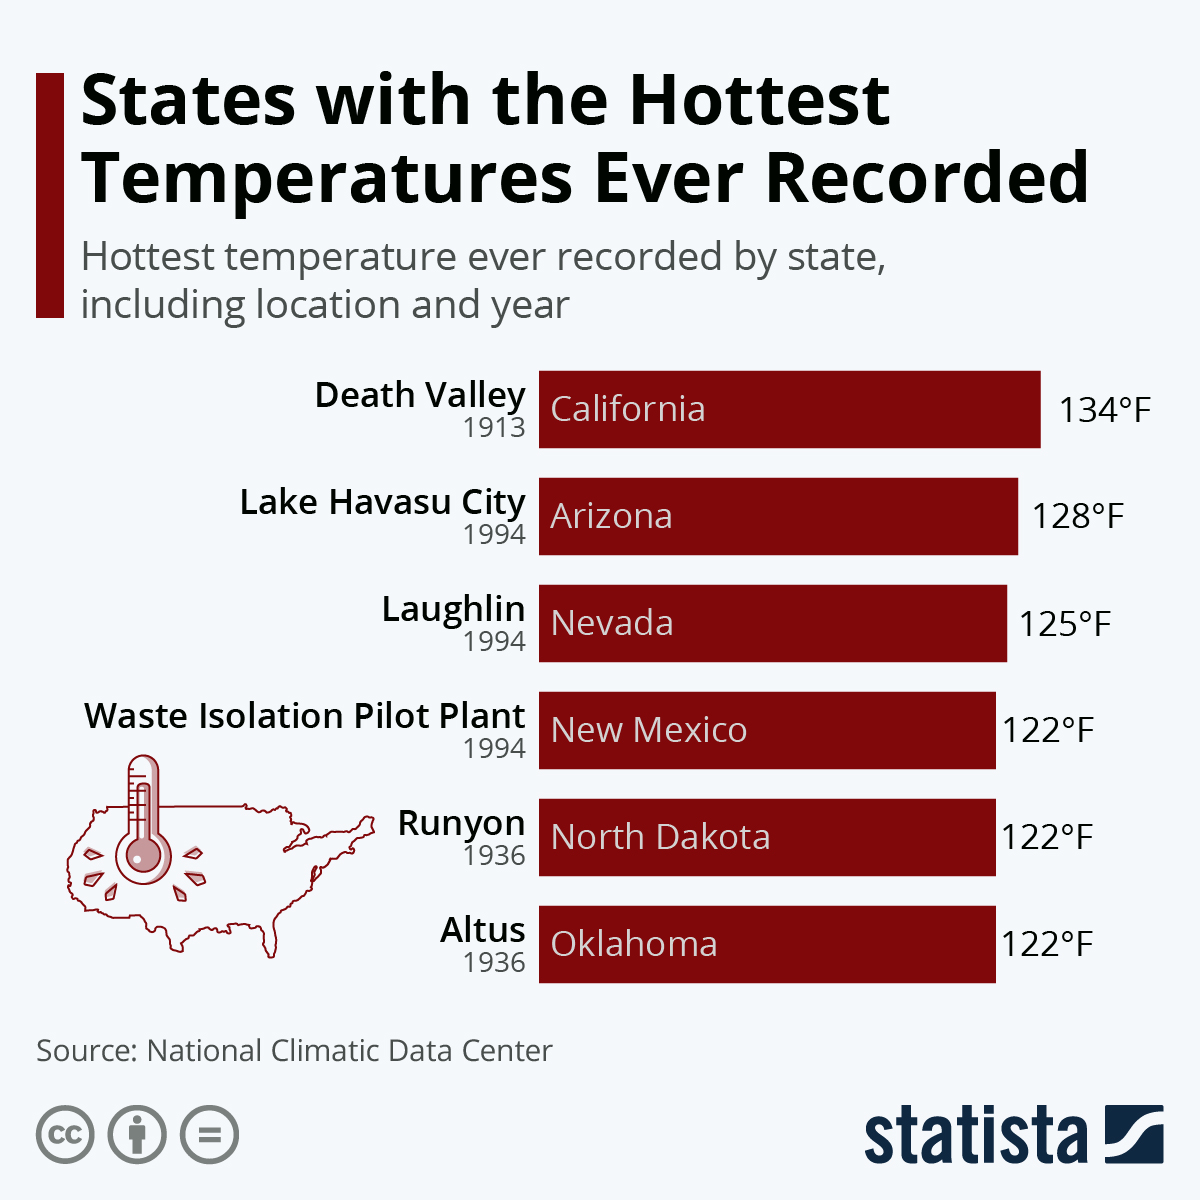 States with the Hottest Temperatures Ever Recorded